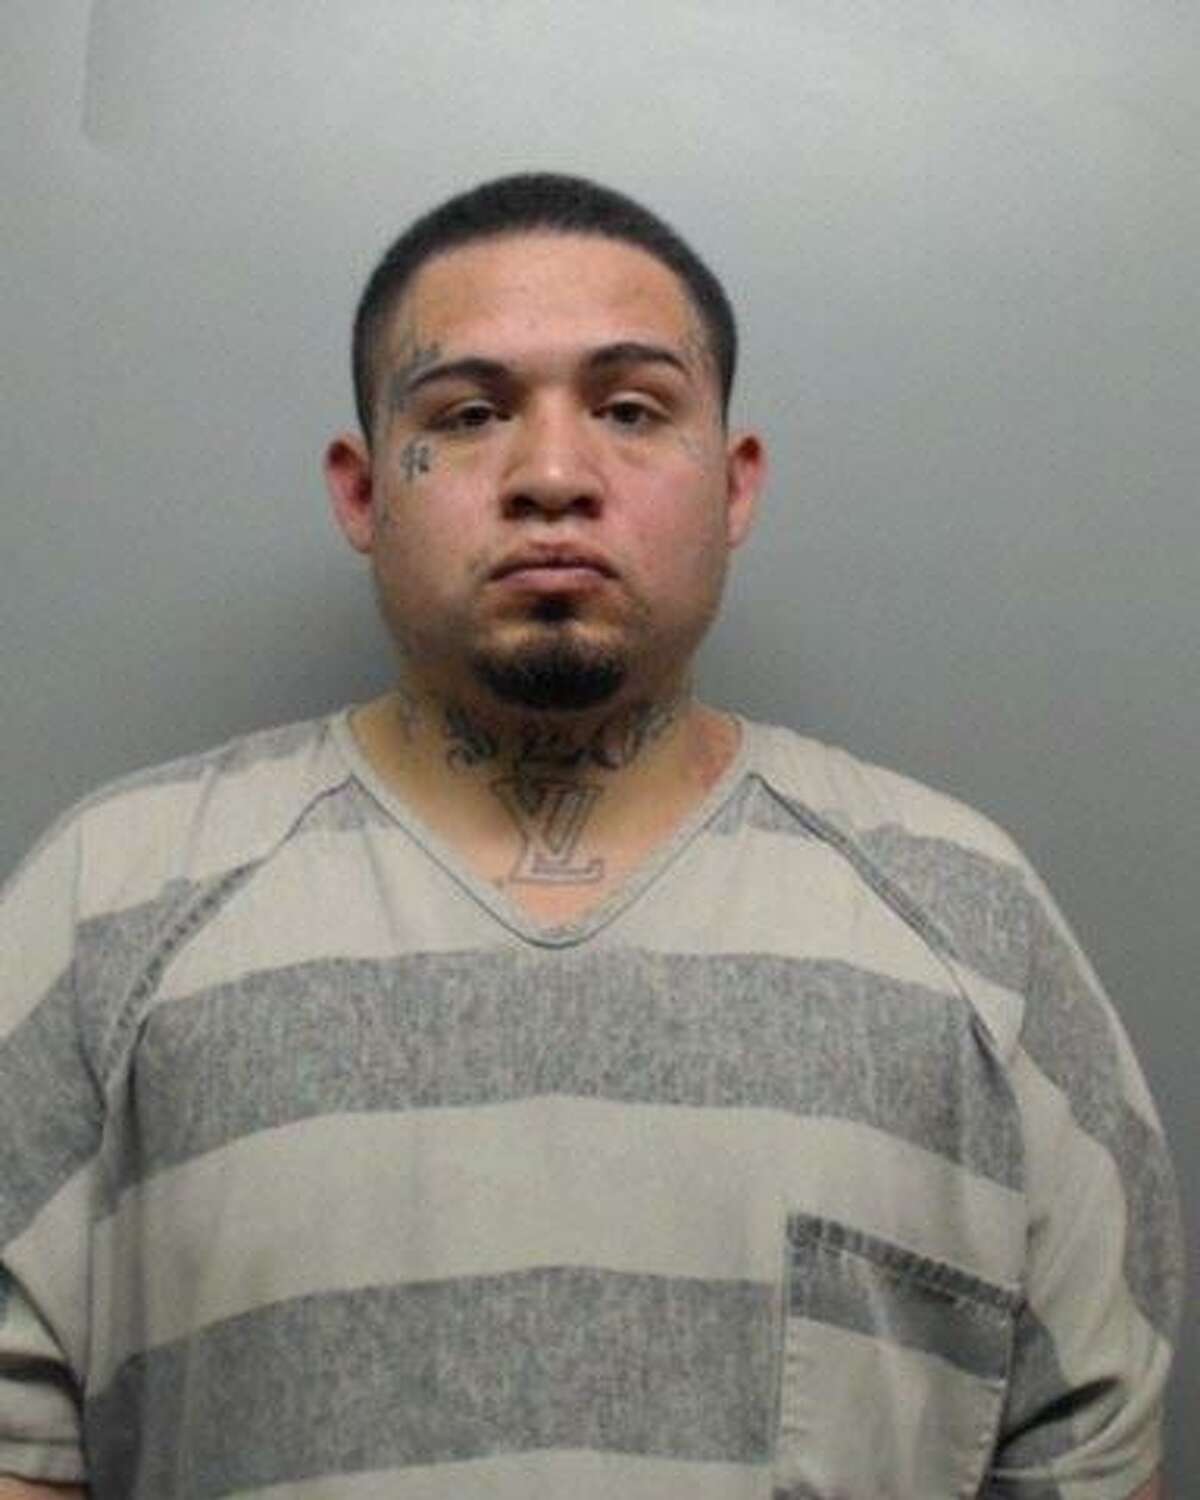 Samuel G. Garcia, 24, possession of a controlled substance